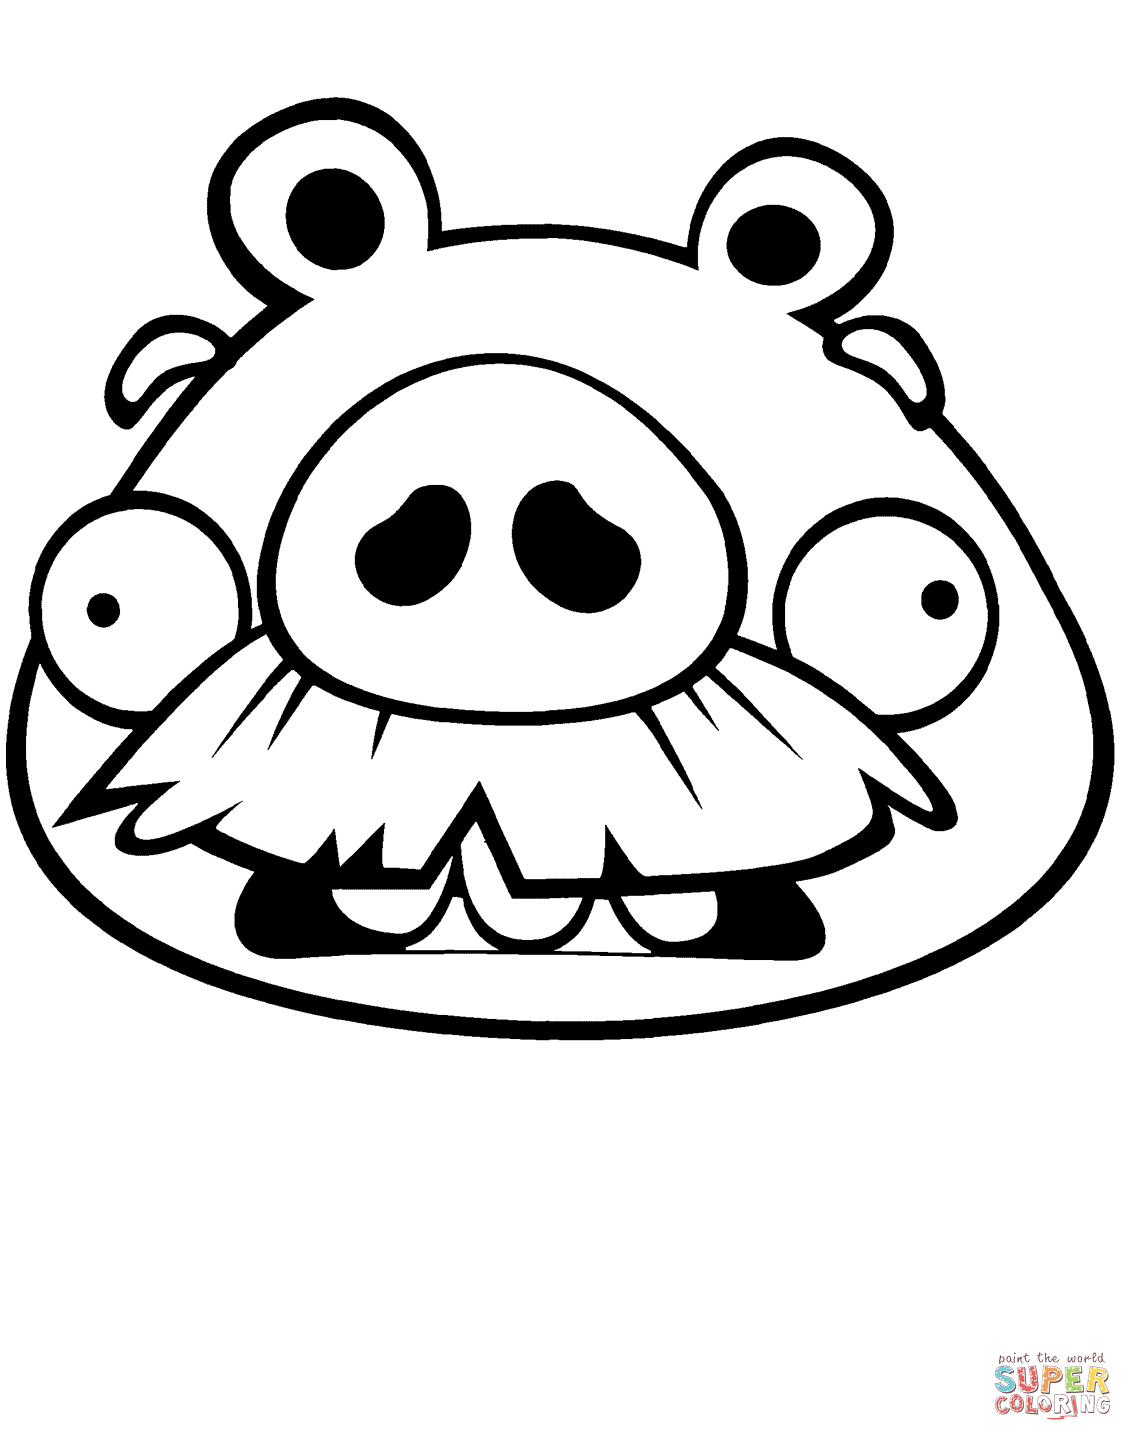 Moustache Pig coloring page | Free Printable Coloring Pages